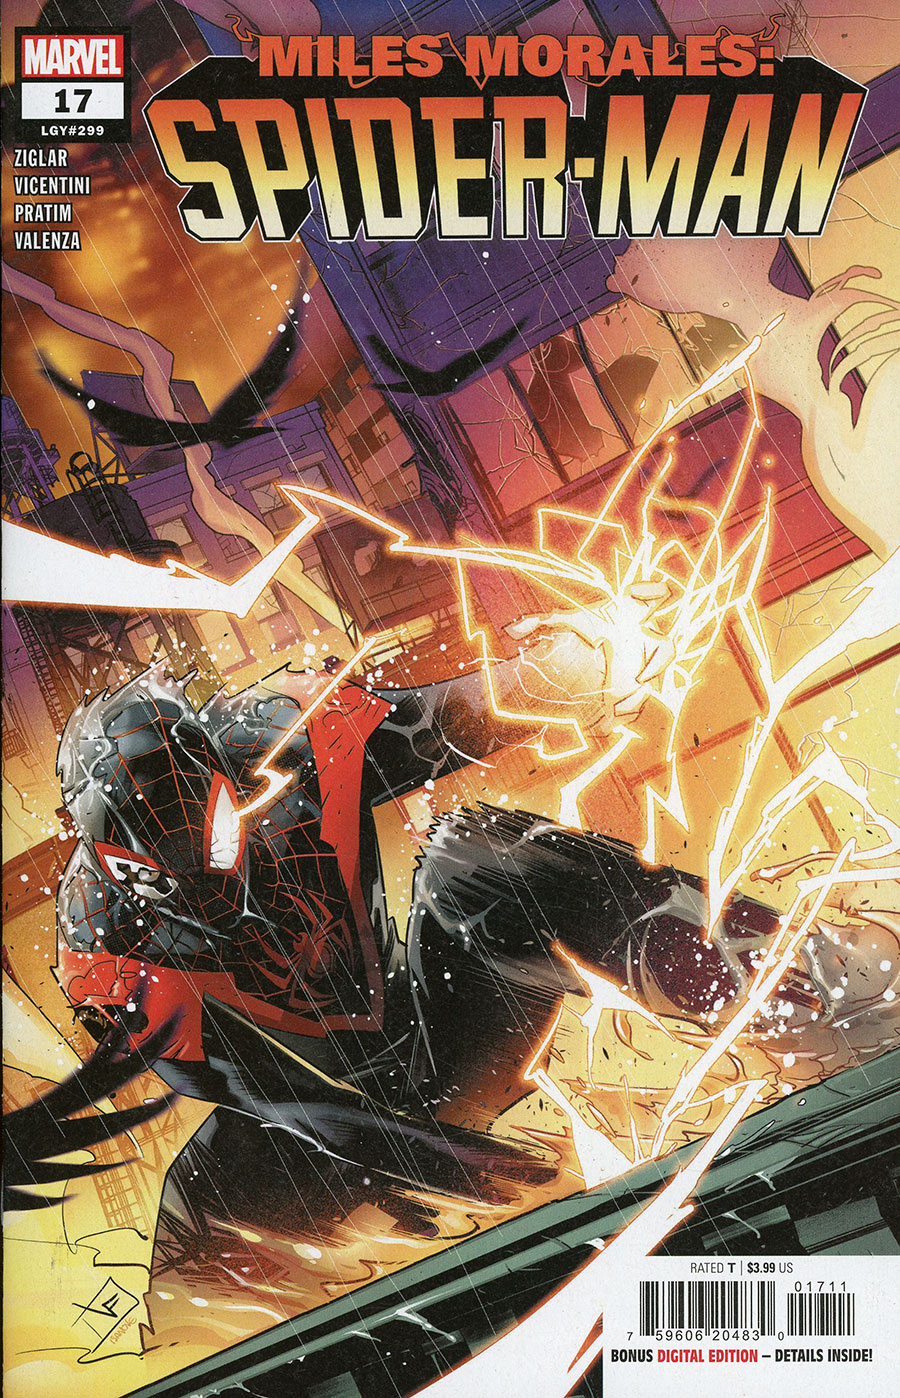 Miles Morales Spider-Man Vol 2 #17 Cover A Regular Federico Vicentini Cover (Gang War Tie-In)